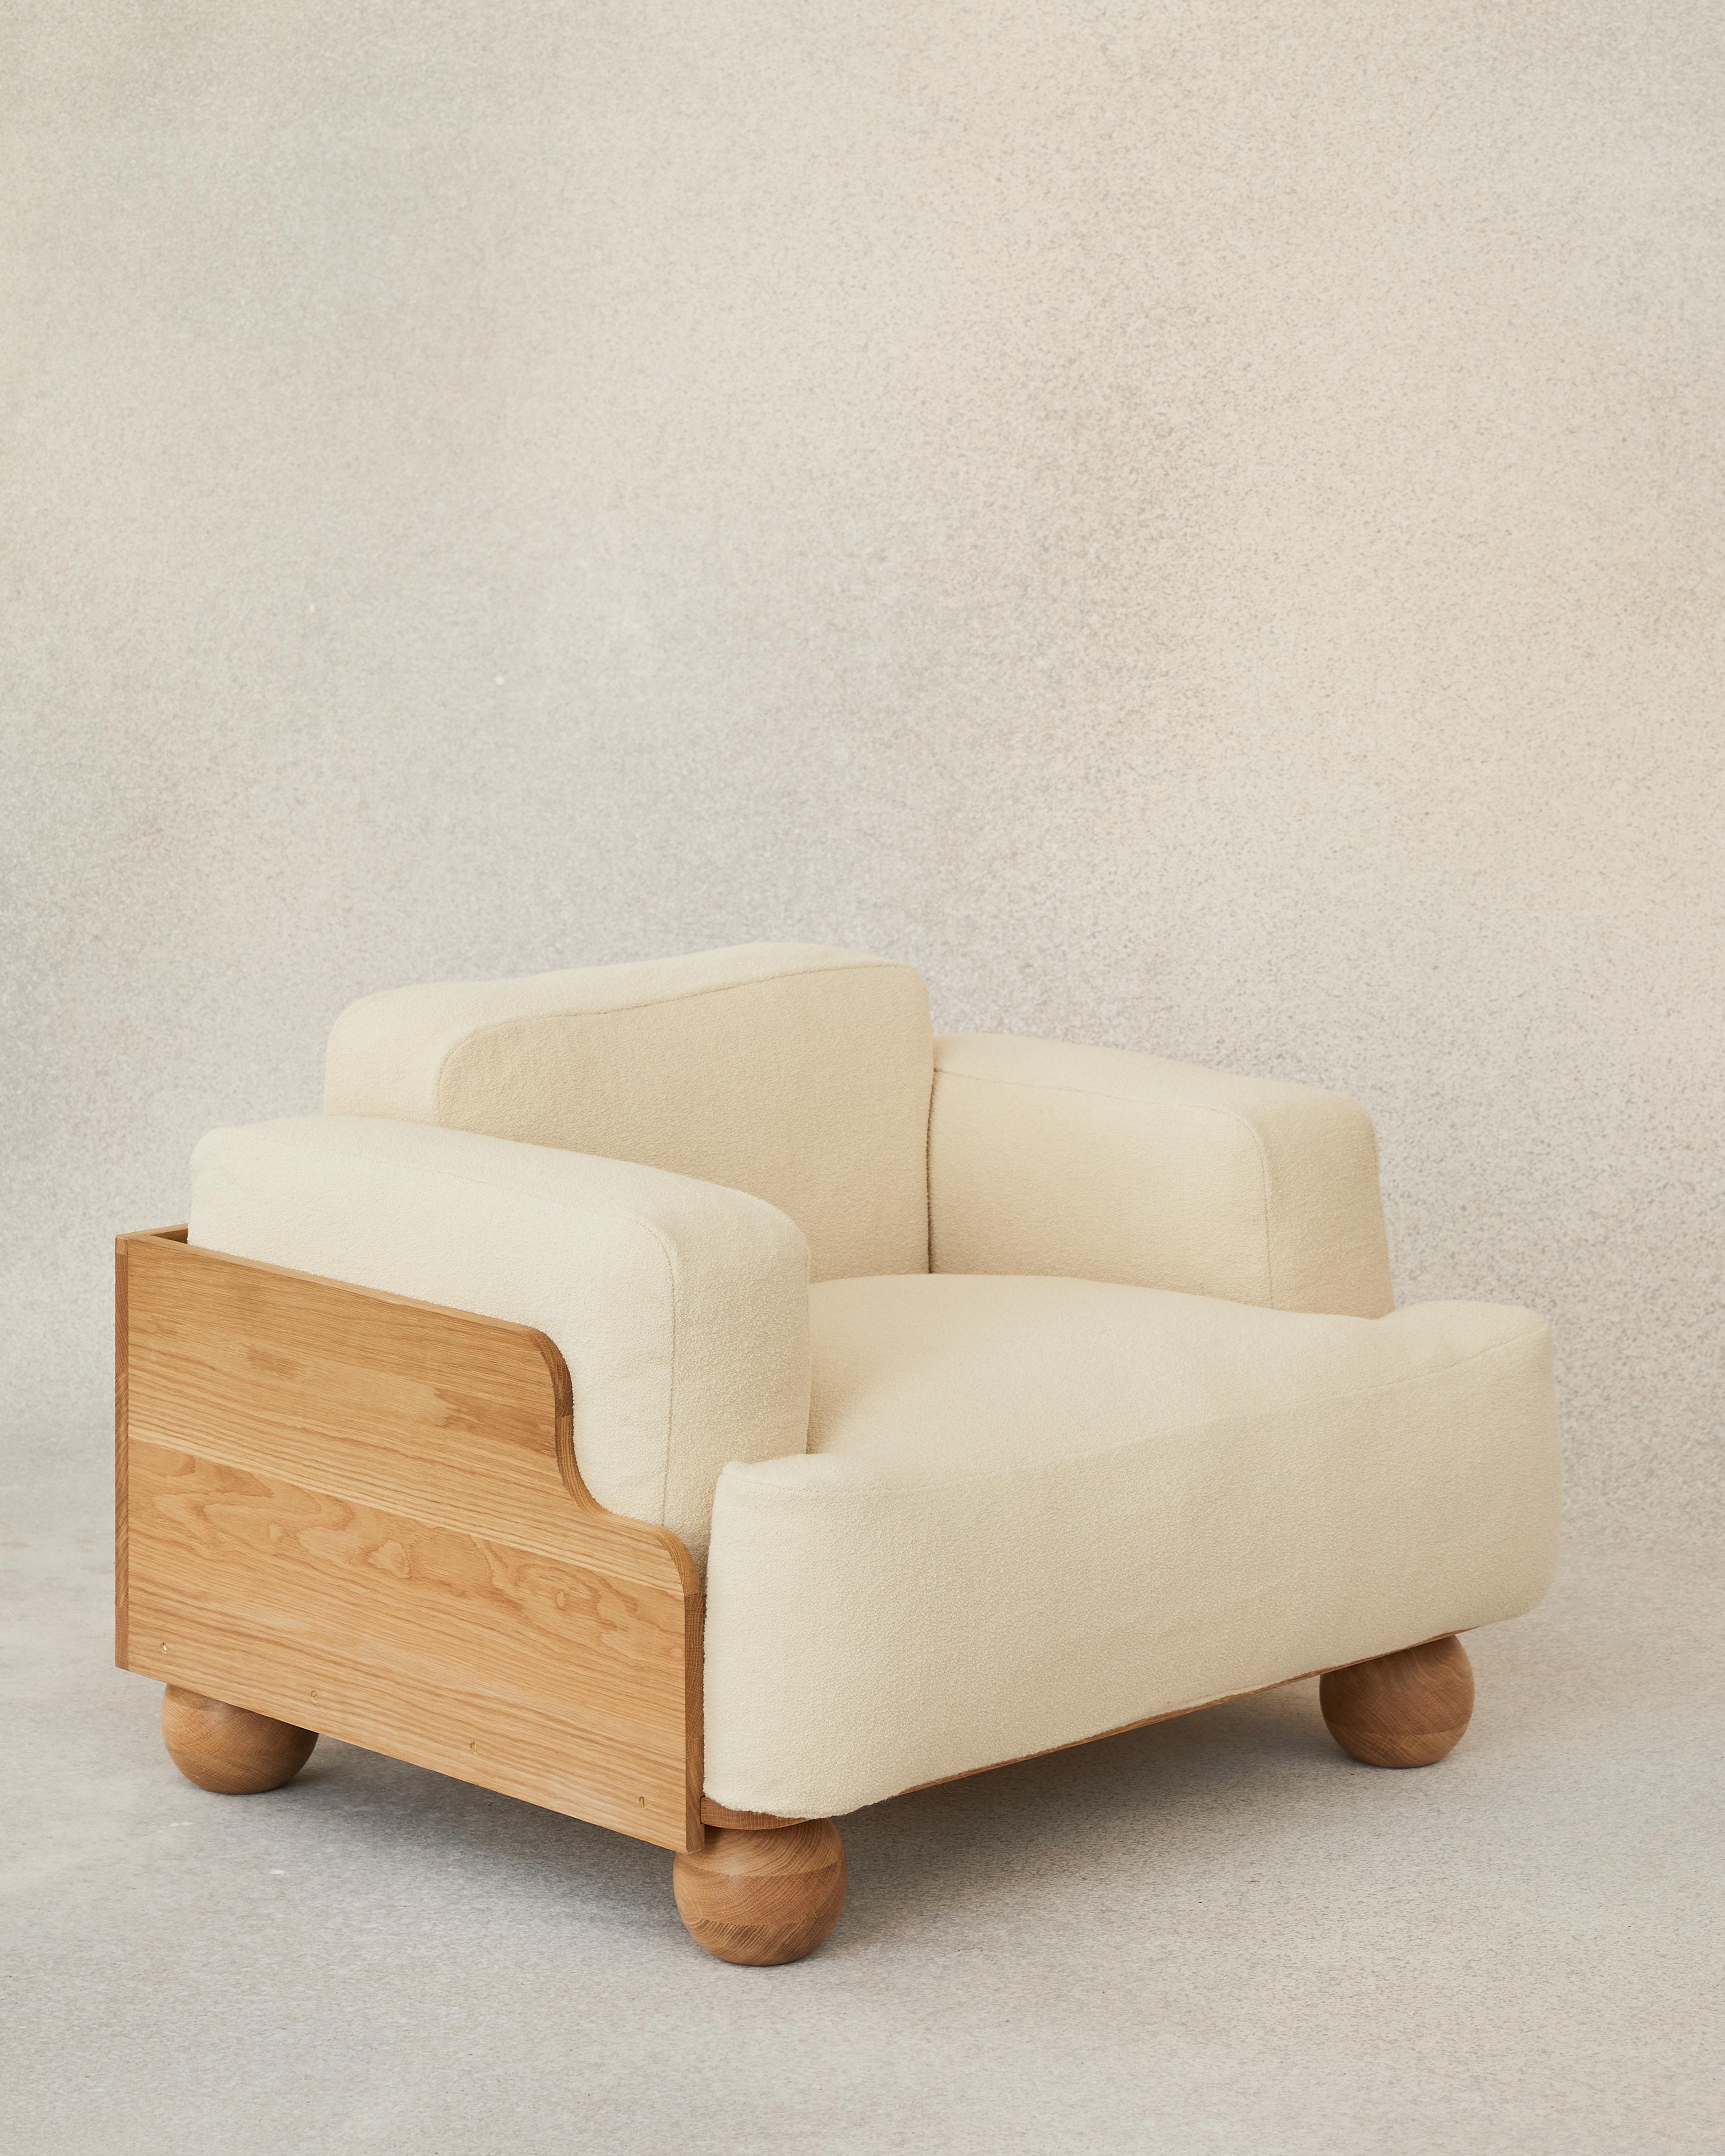 The Cove Armchair is defined by its sculptural and enveloping nature. Planes of beautifully grained oak wrap around the sides and back of the soft cushions, following the lines of their curved corners and edges.

Thick and deep seat, back and arm